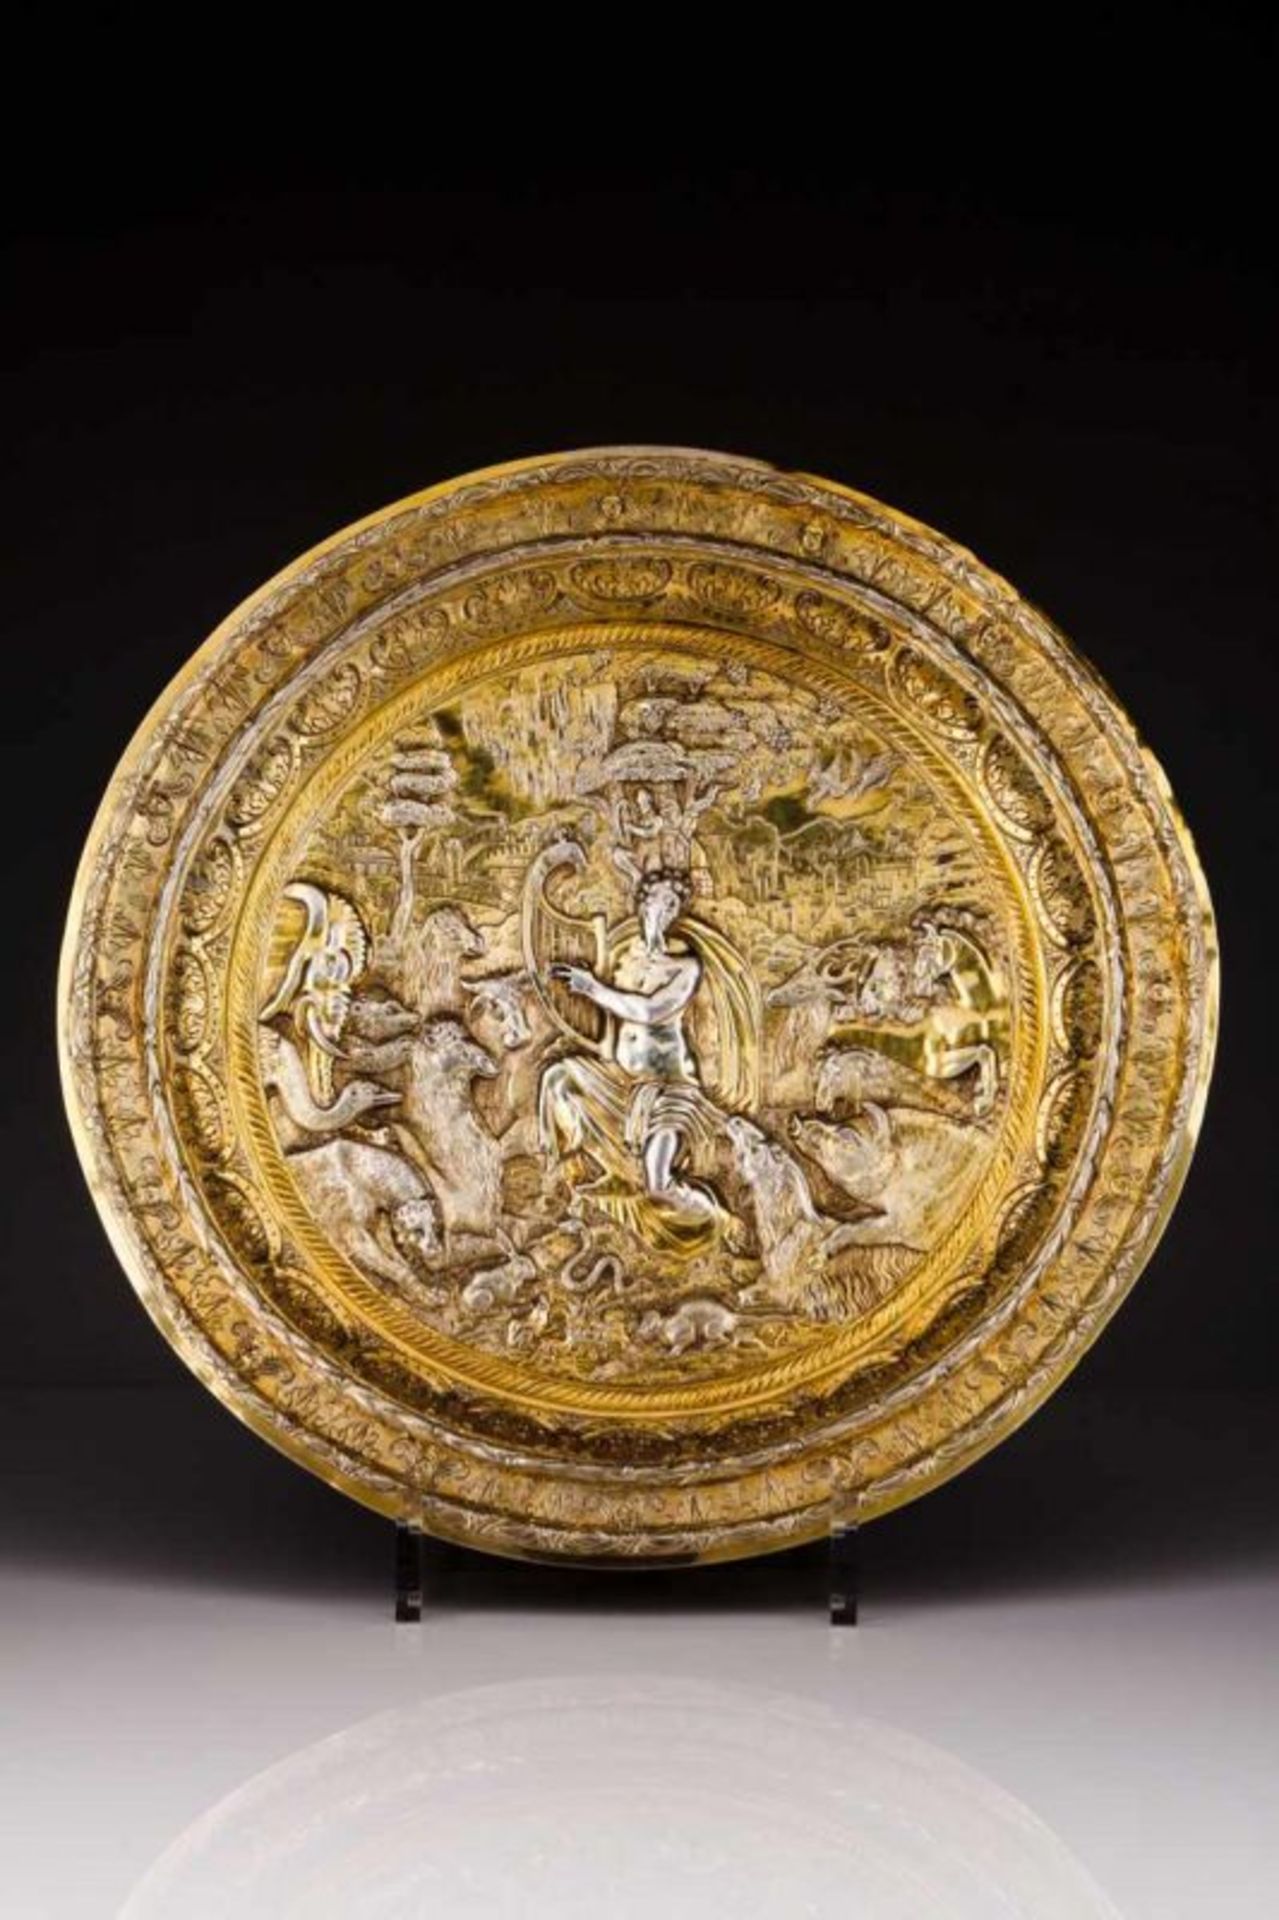 A rare salver German silver gilt, first half of the 17th century Relief decoration with impressive